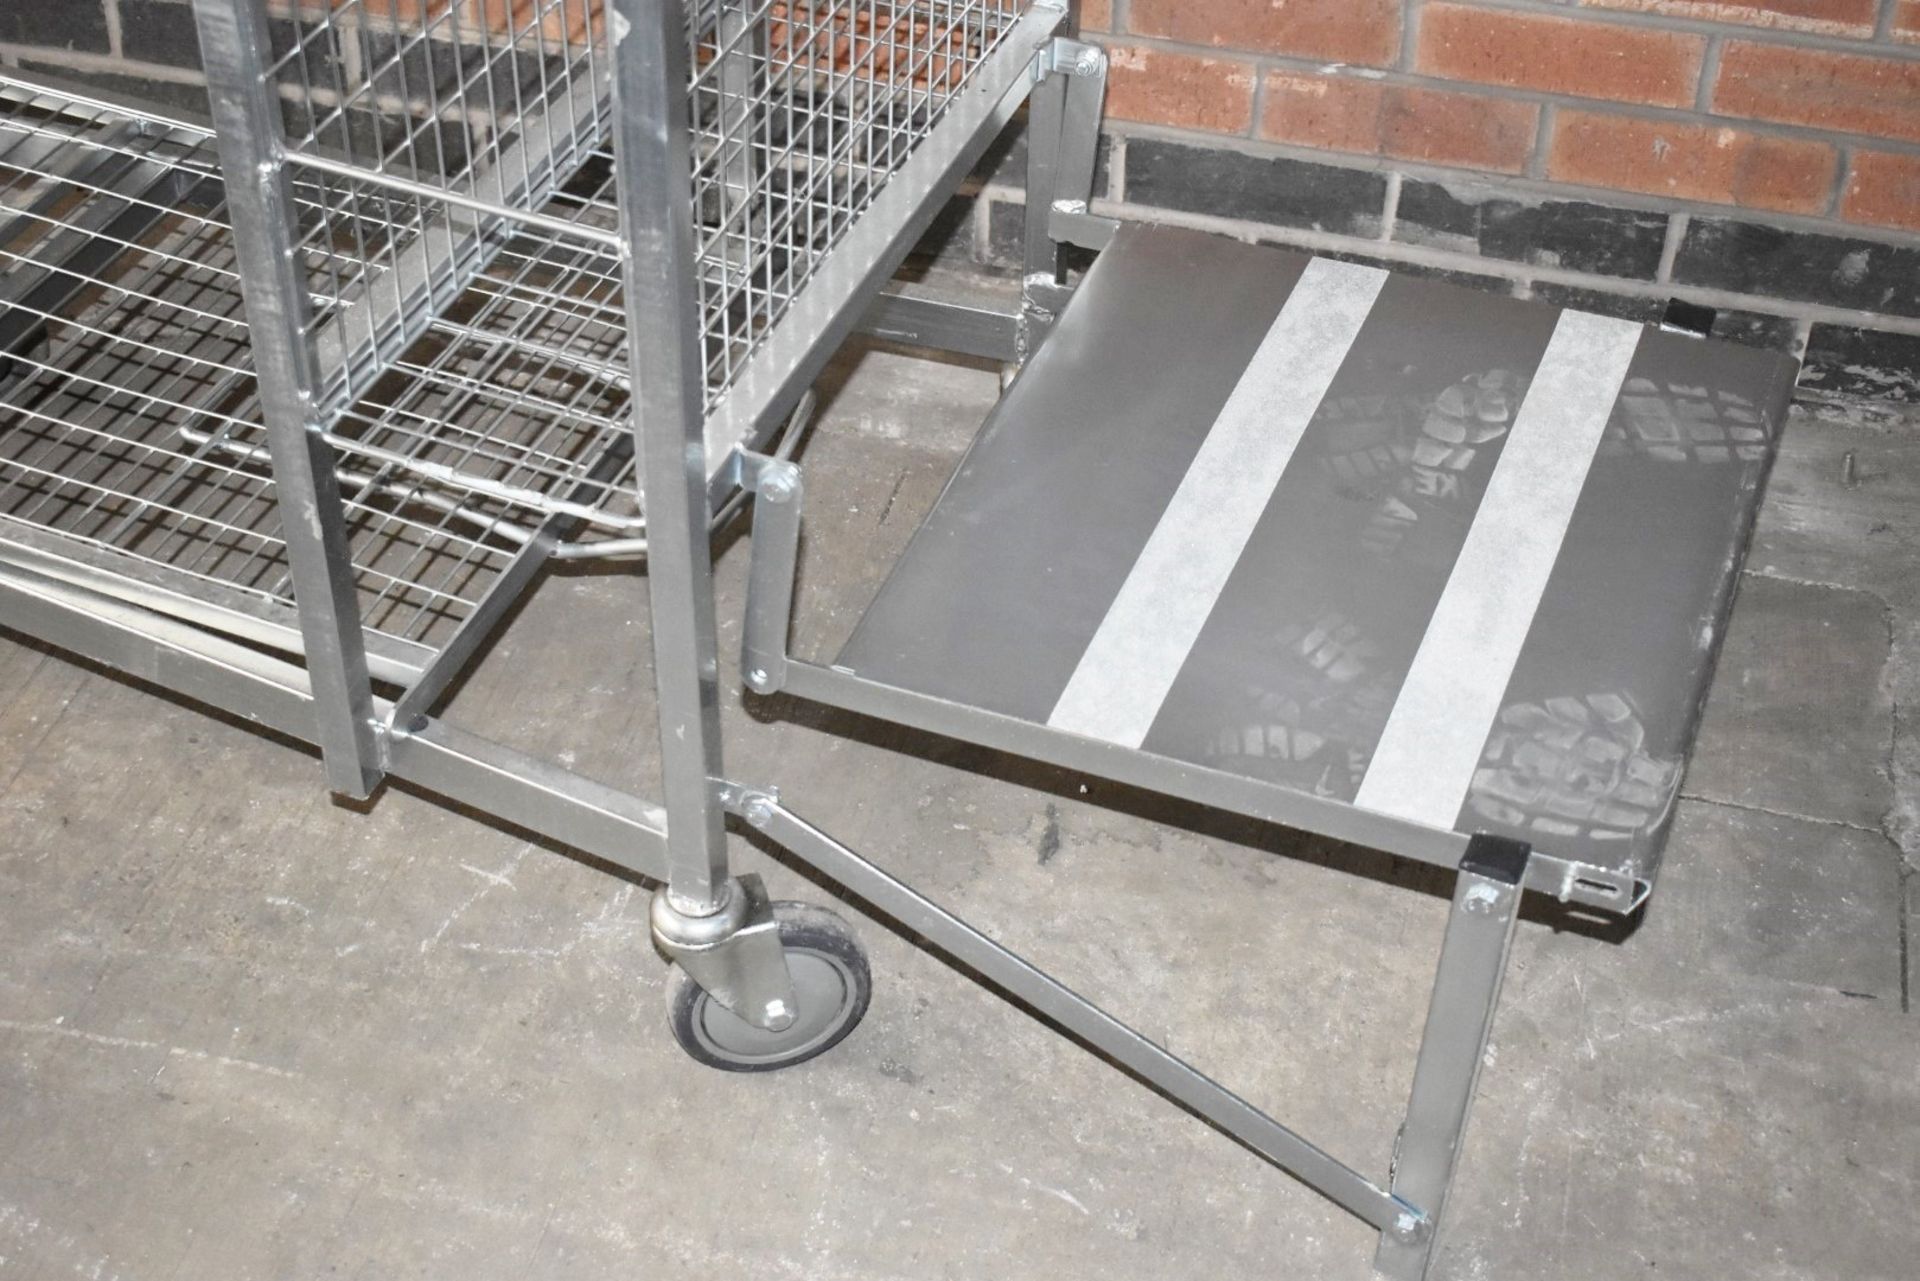 1 x Supermarket Retail Merchandising Trolley With Pull Out Step and Folding Shelf - CL595 - Ref: CCA - Image 9 of 12